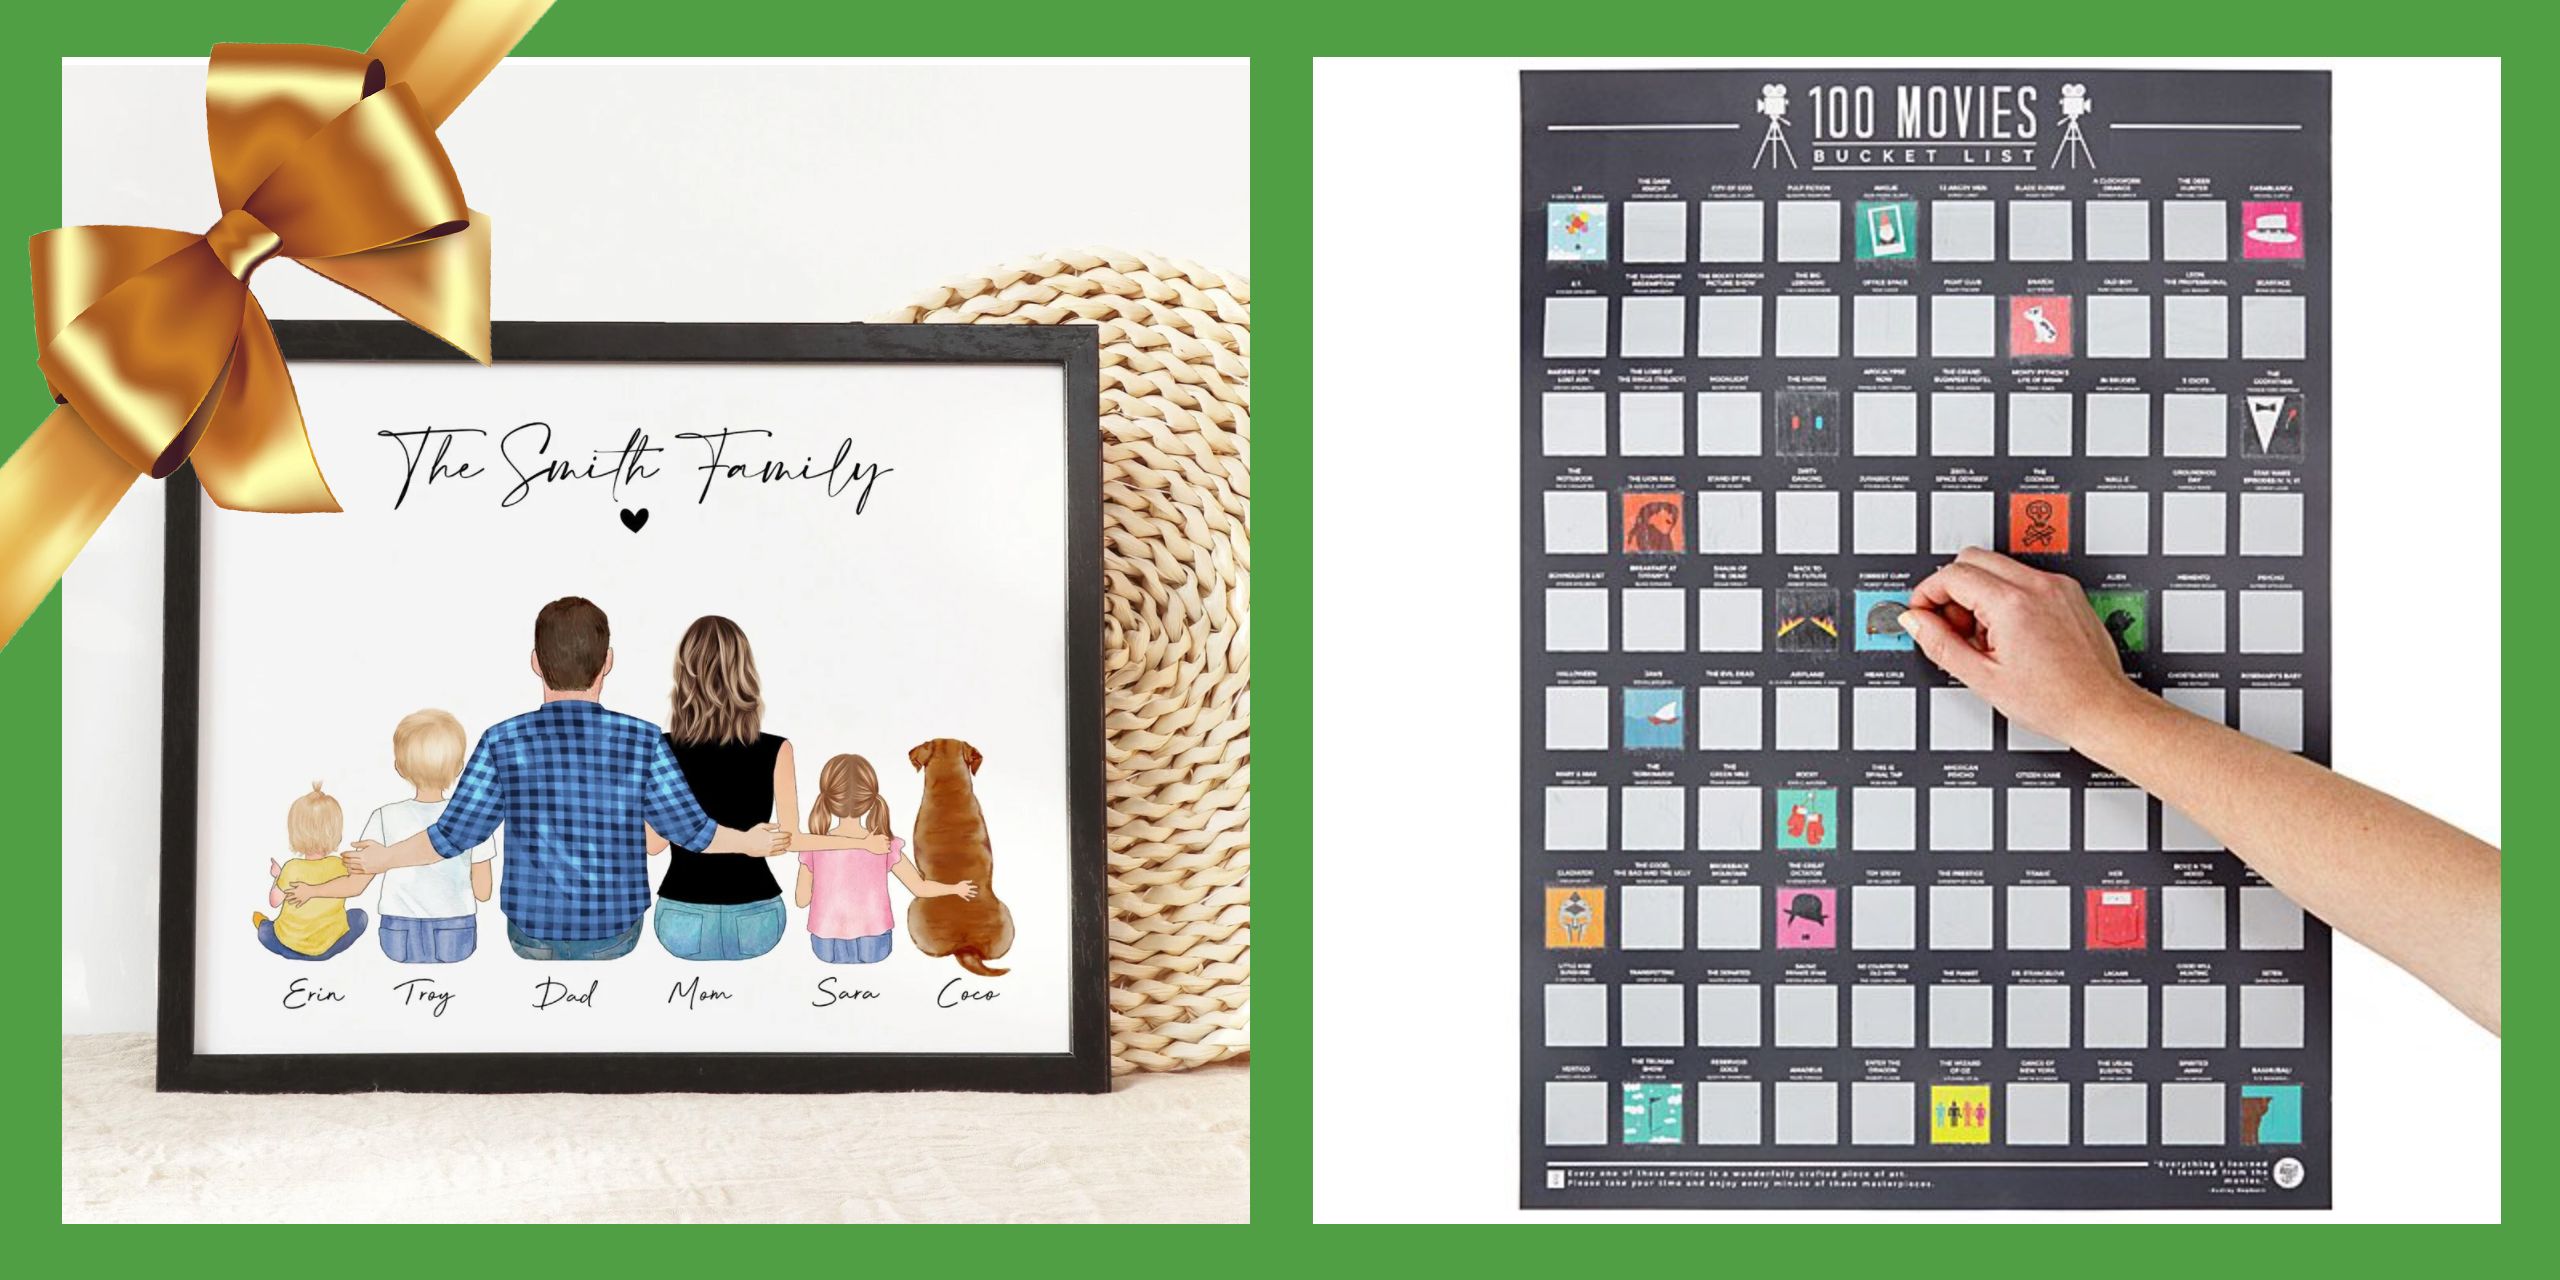 40 Best Gift Ideas for Families in 2023 - Unique Family Gifts